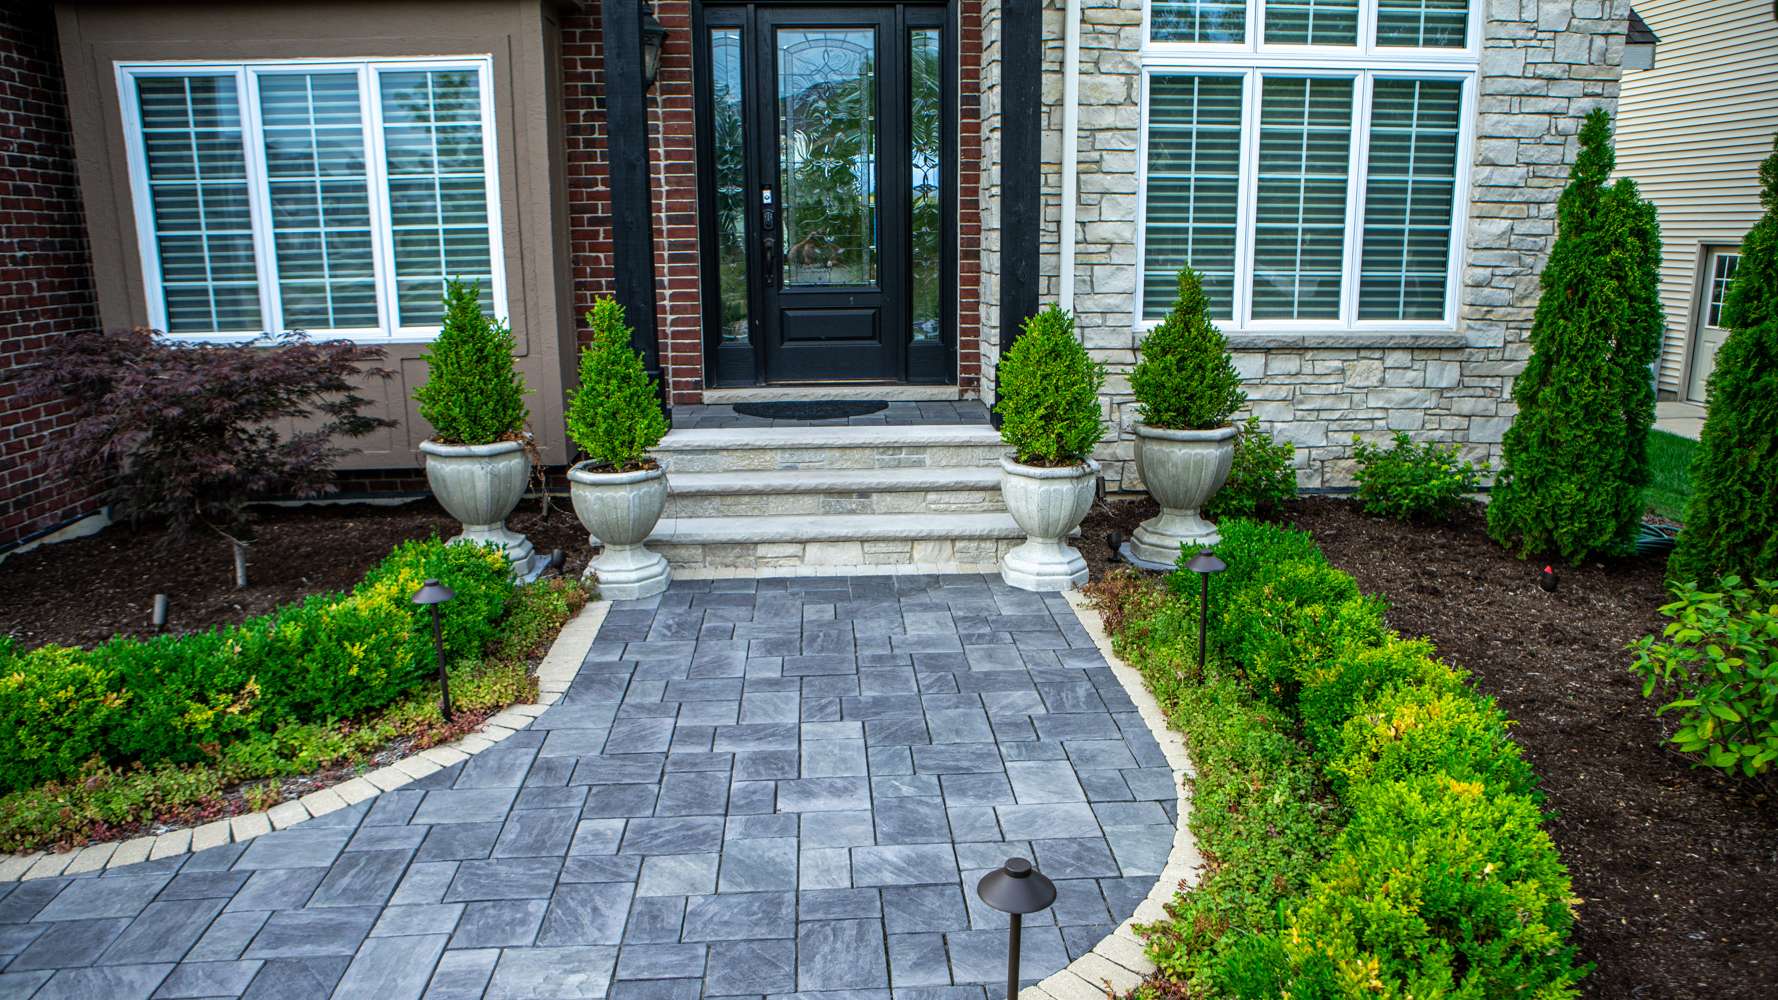 Paver walkway with different color border